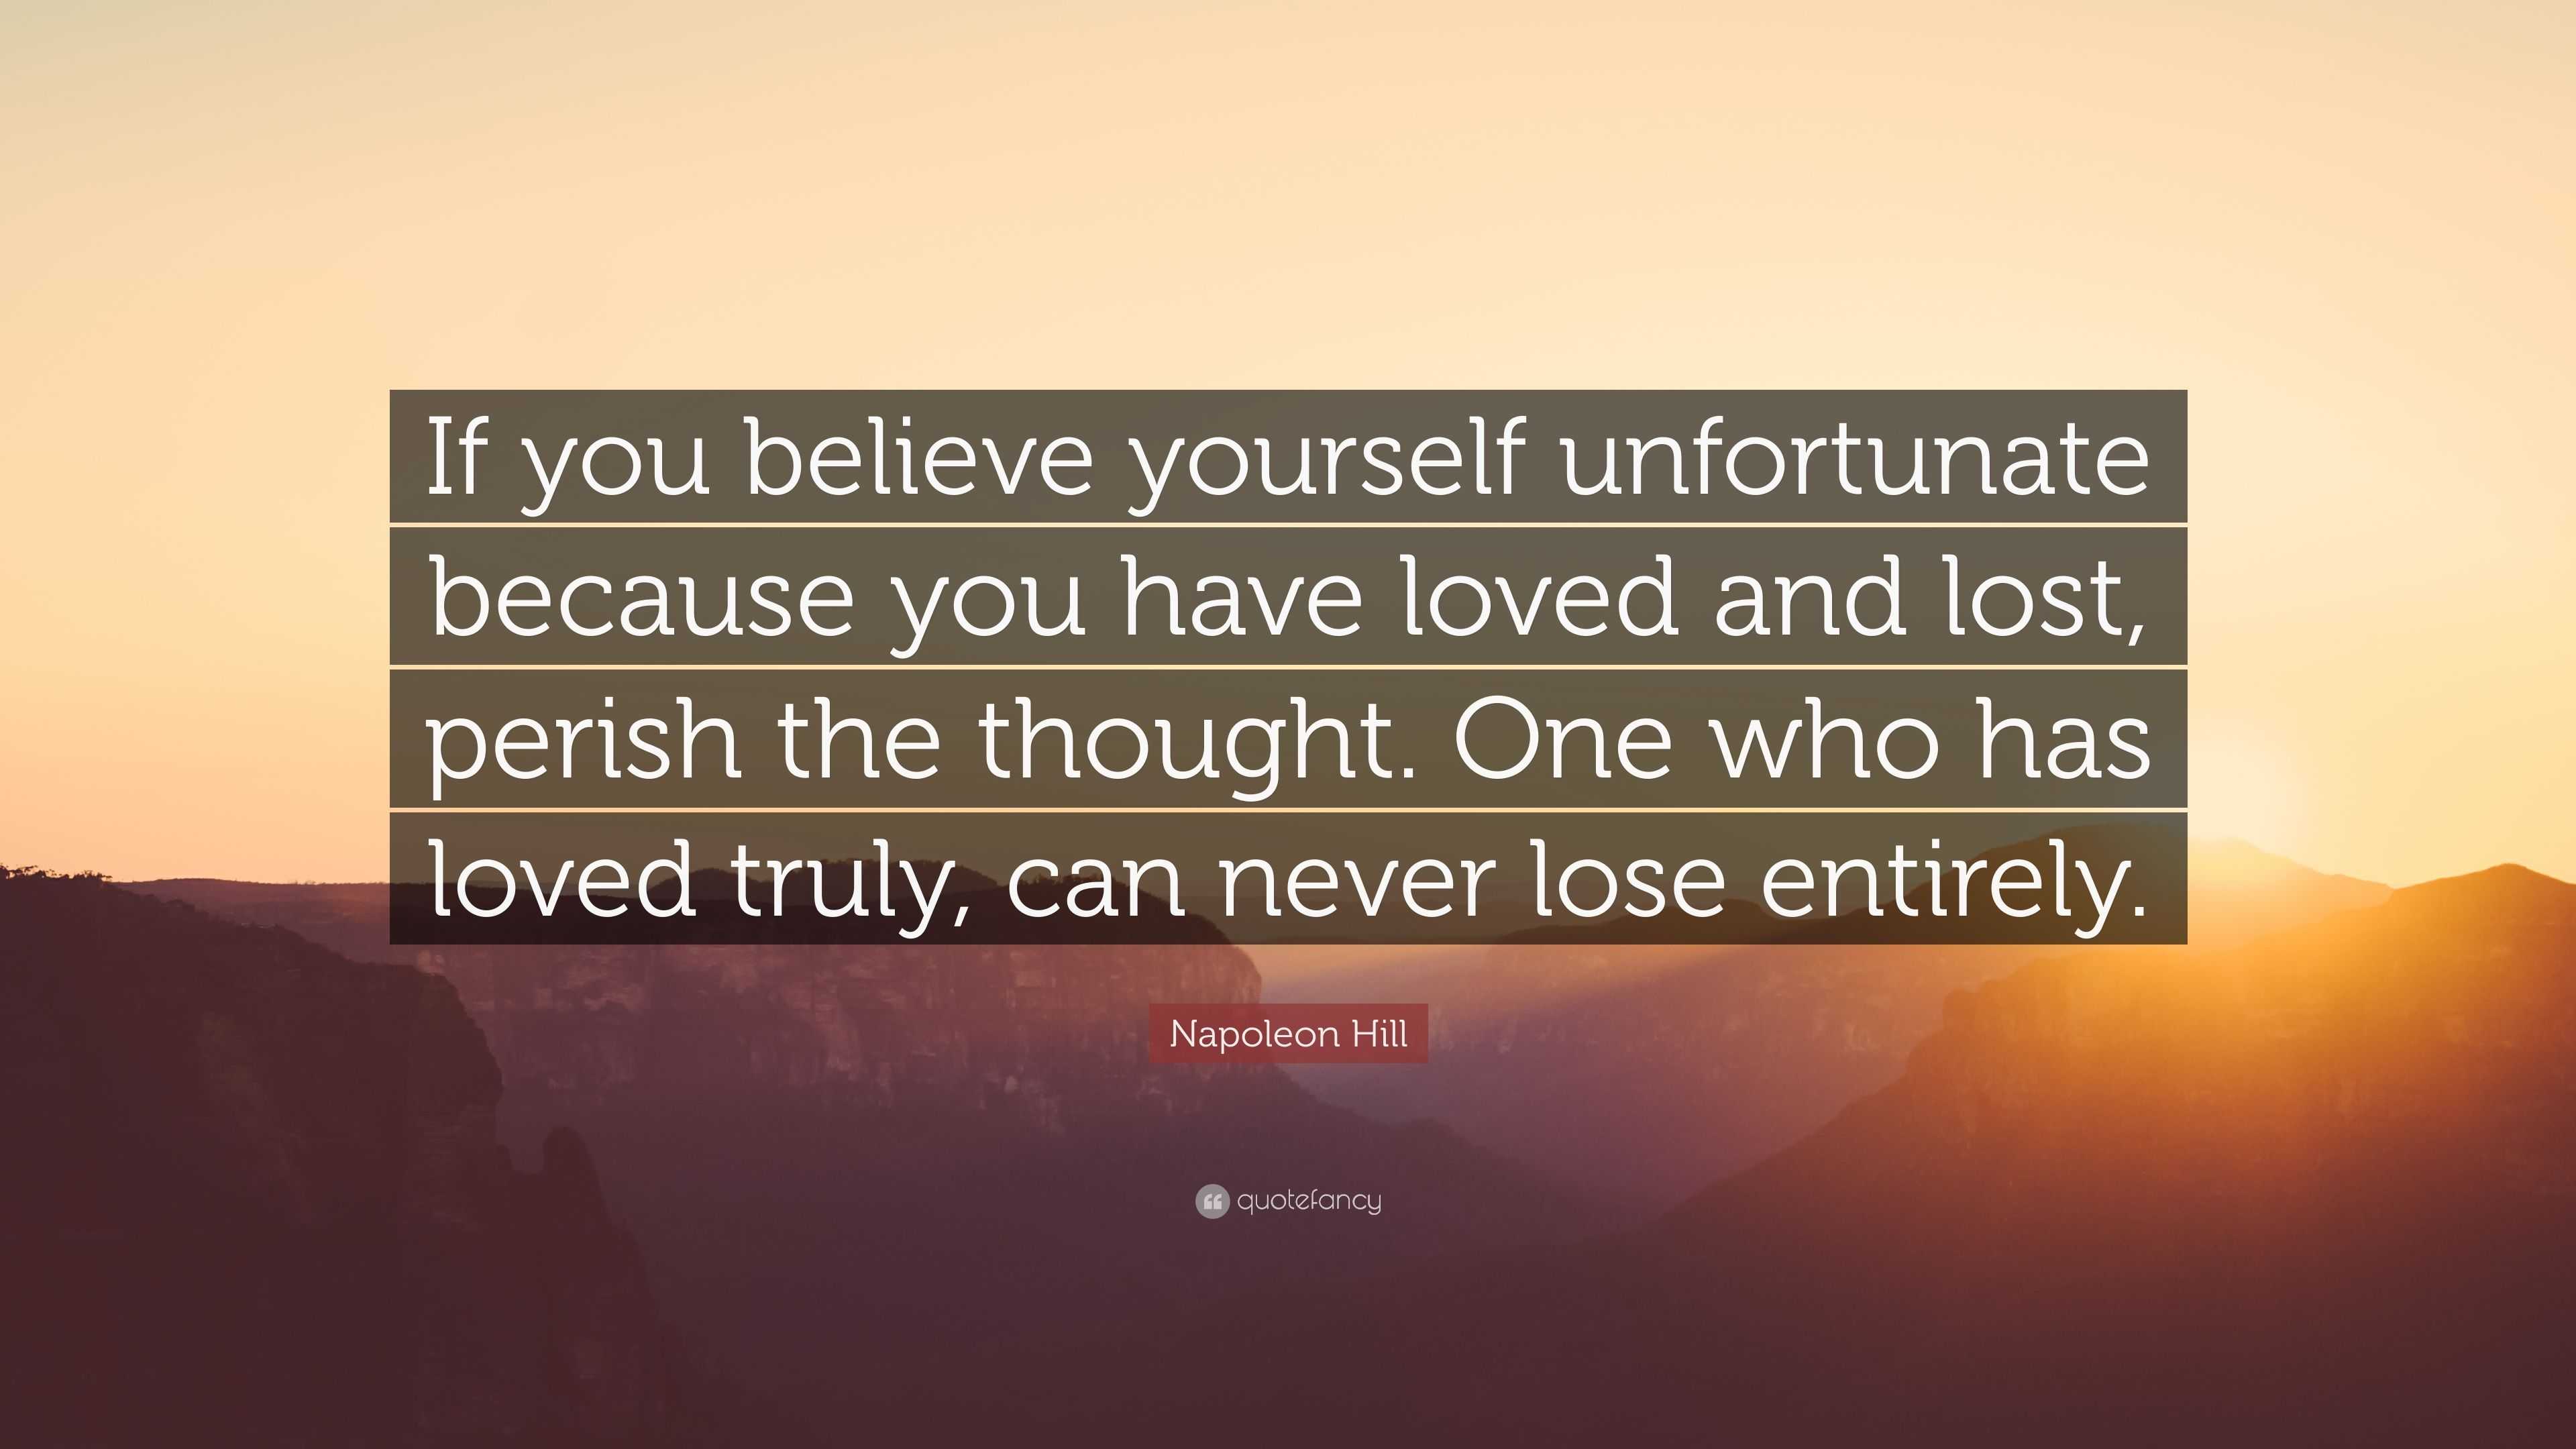 Napoleon Hill Quote “If you believe yourself unfortunate because you have loved and lost